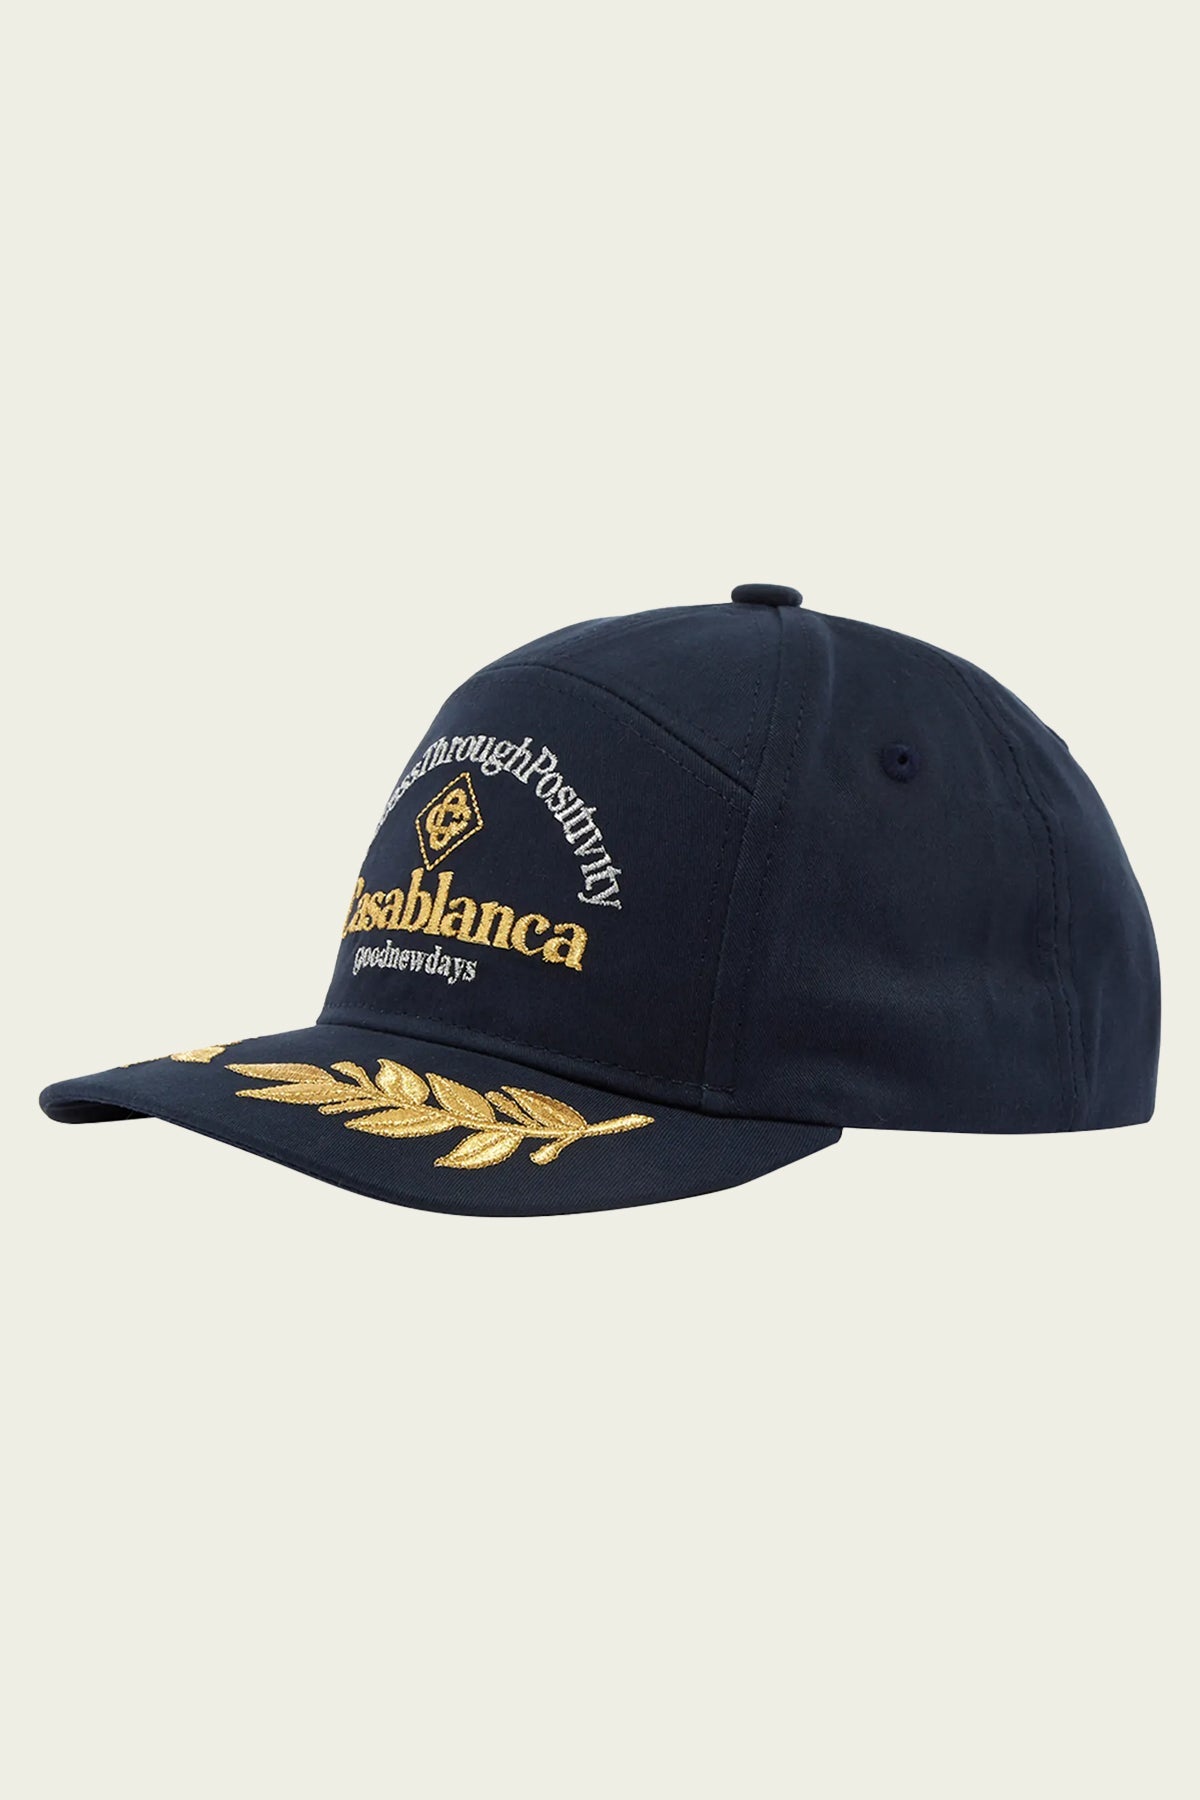 Success Through Positivity Embroidered Cap in Navy - shop-olivia.com